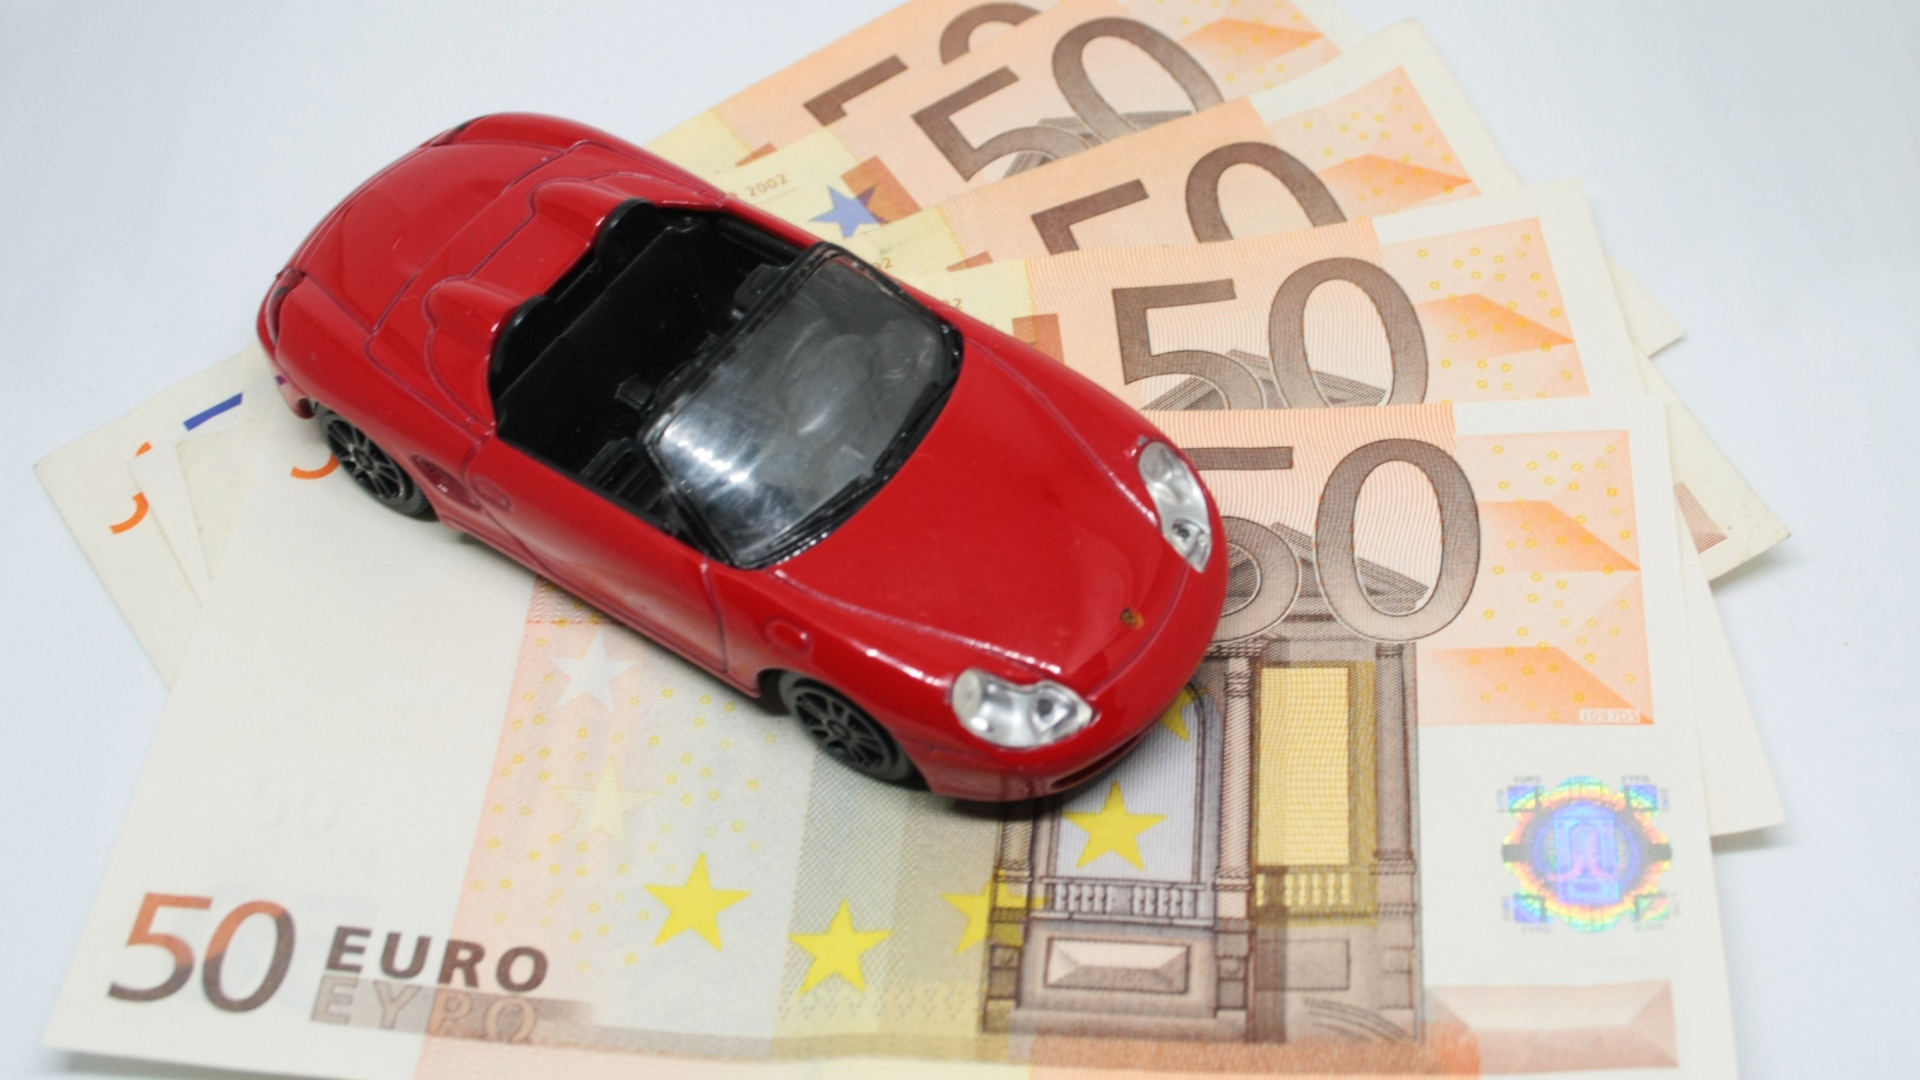 Red toy car with euro bills